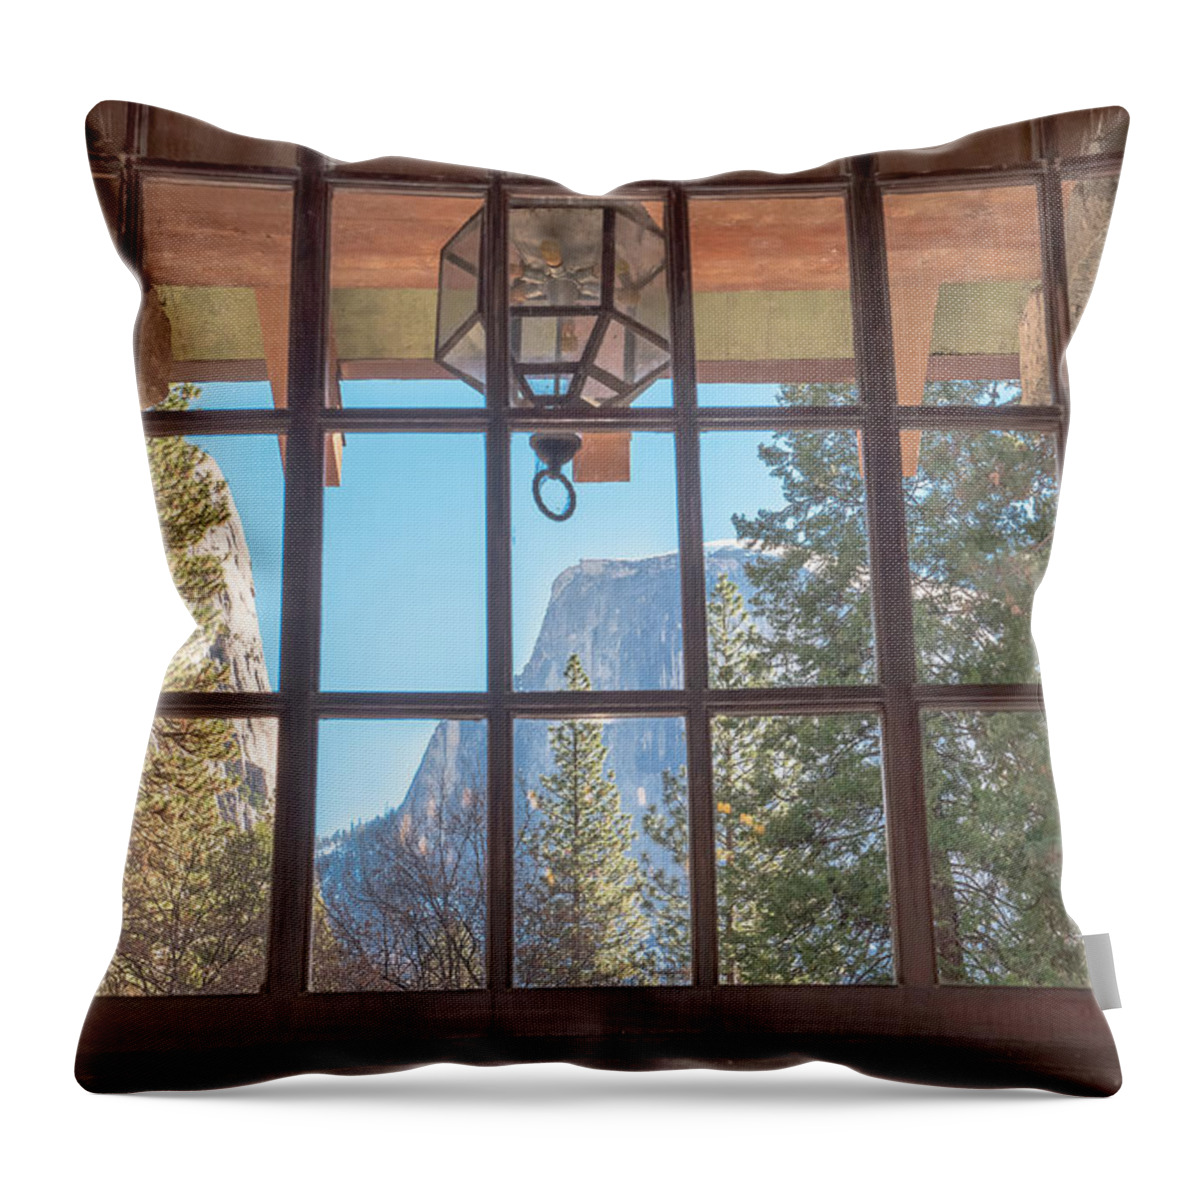 Ahwahnee Hotel Throw Pillow featuring the photograph Room With A View by Bill Roberts